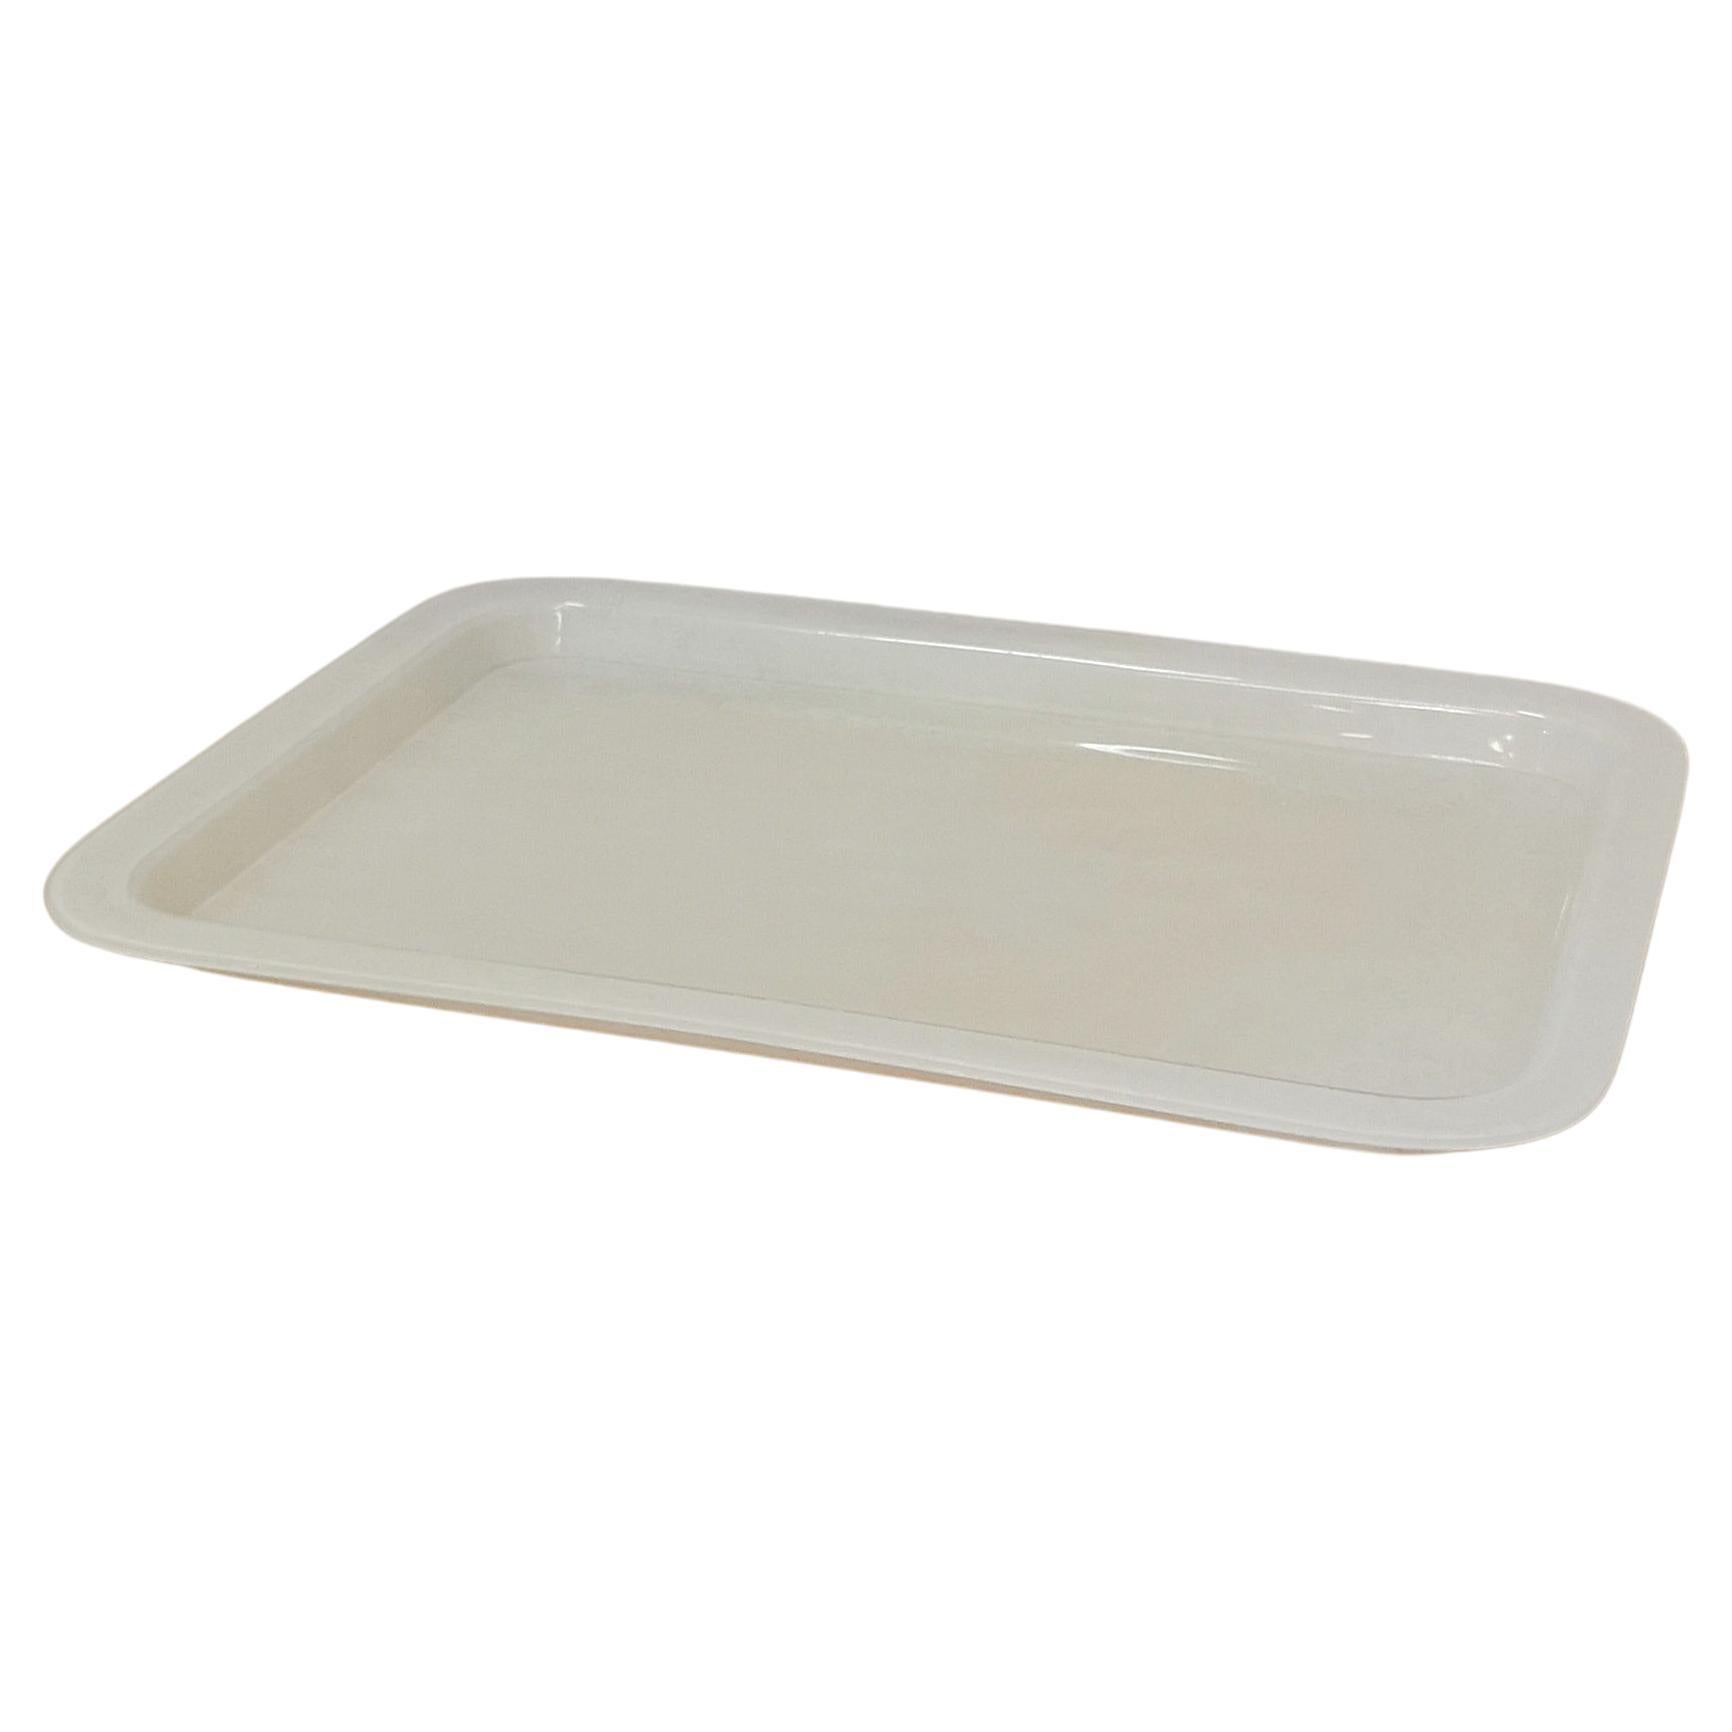 Midcentury Modern Tray Table Serving Piece Rectangular White Lucite Italy 1970s For Sale